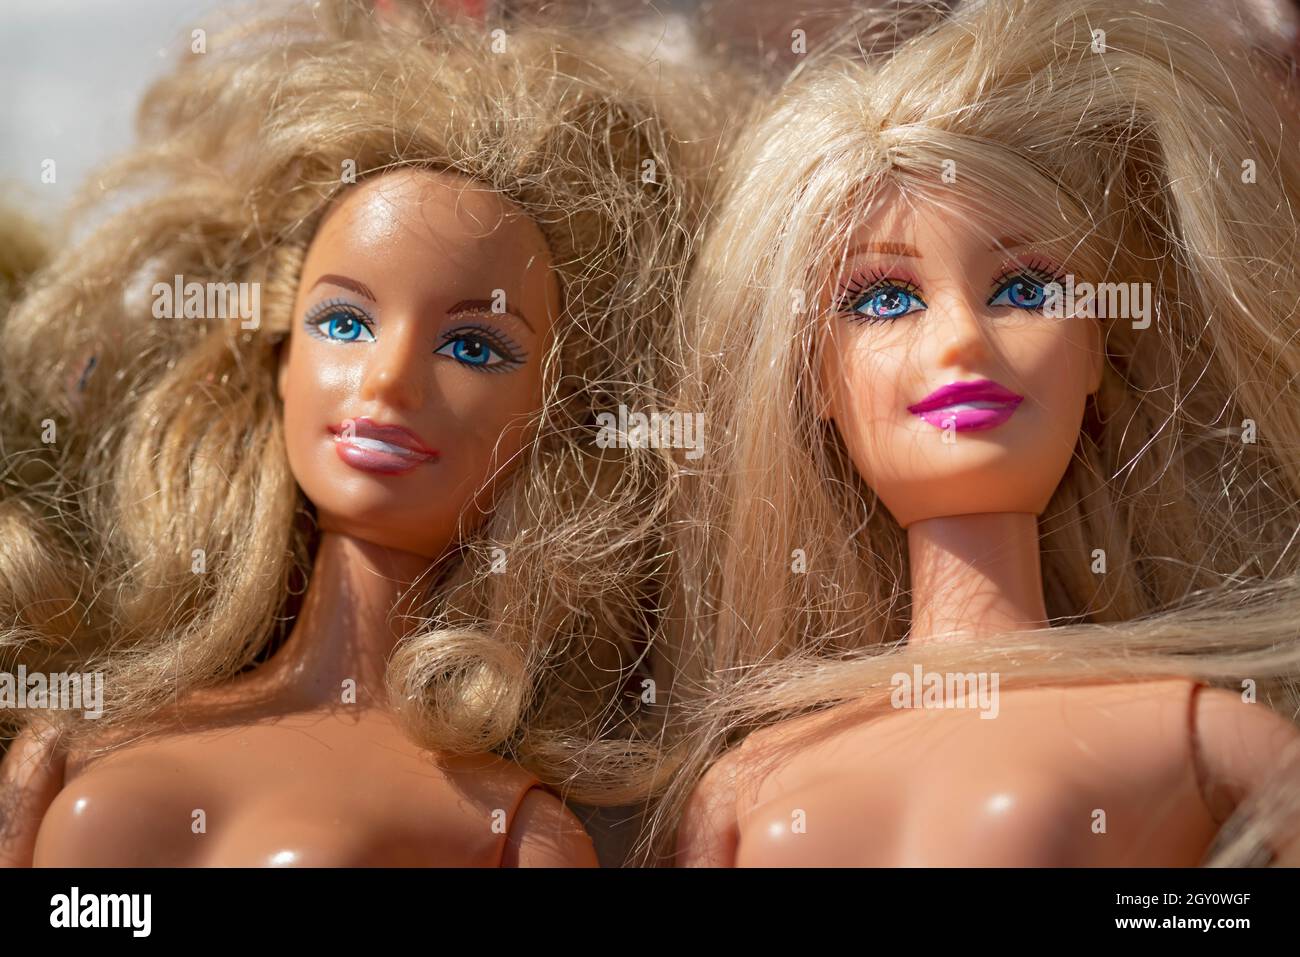 Close-up of a Barbie Dolls Face with Blonde Hair Stock Photo